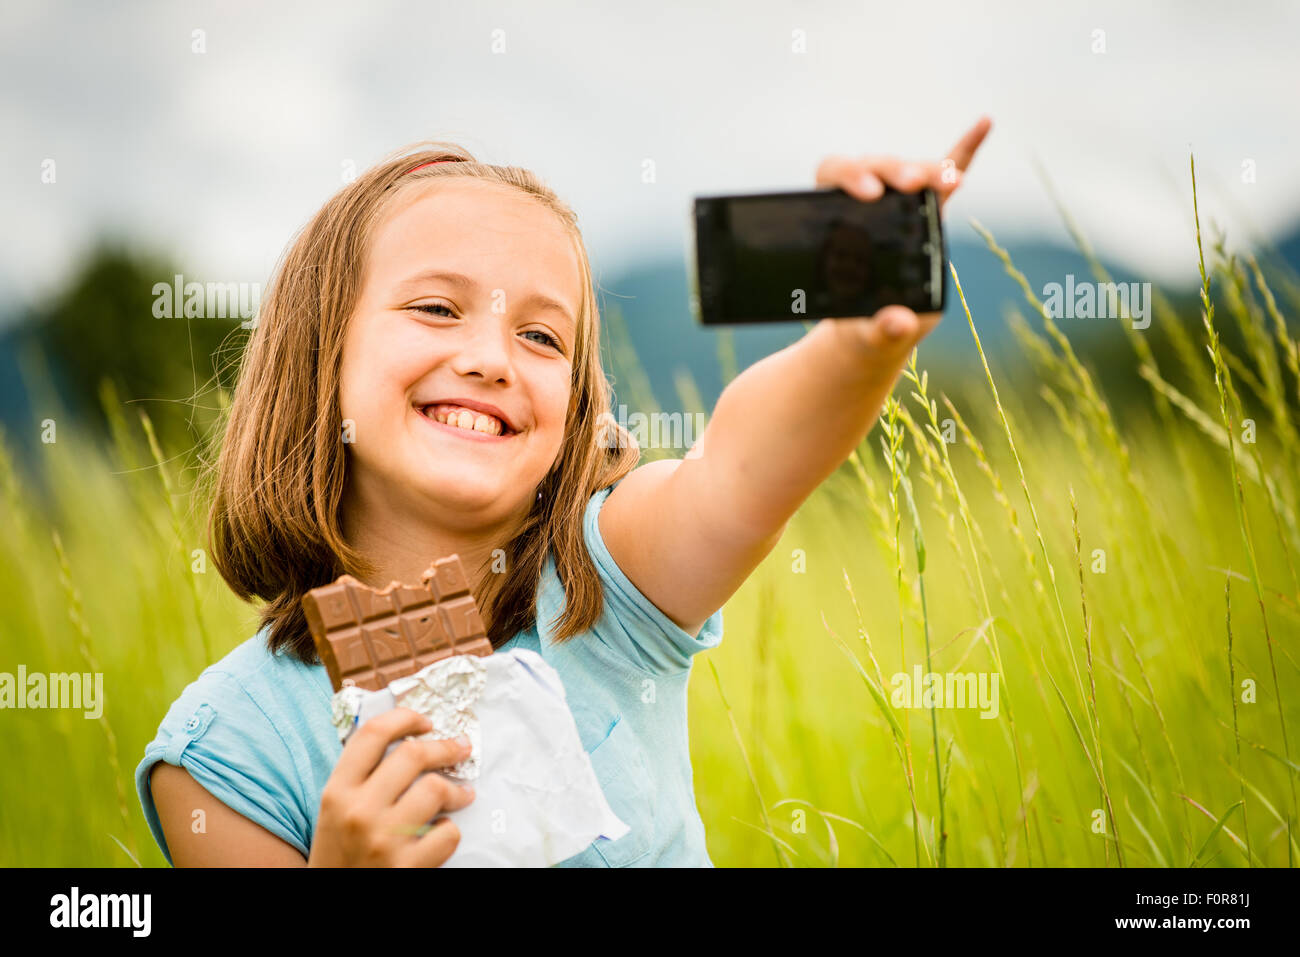 Child is taking photo with mobile phone camera while eating chocolate outdoor in nature Stock Photo